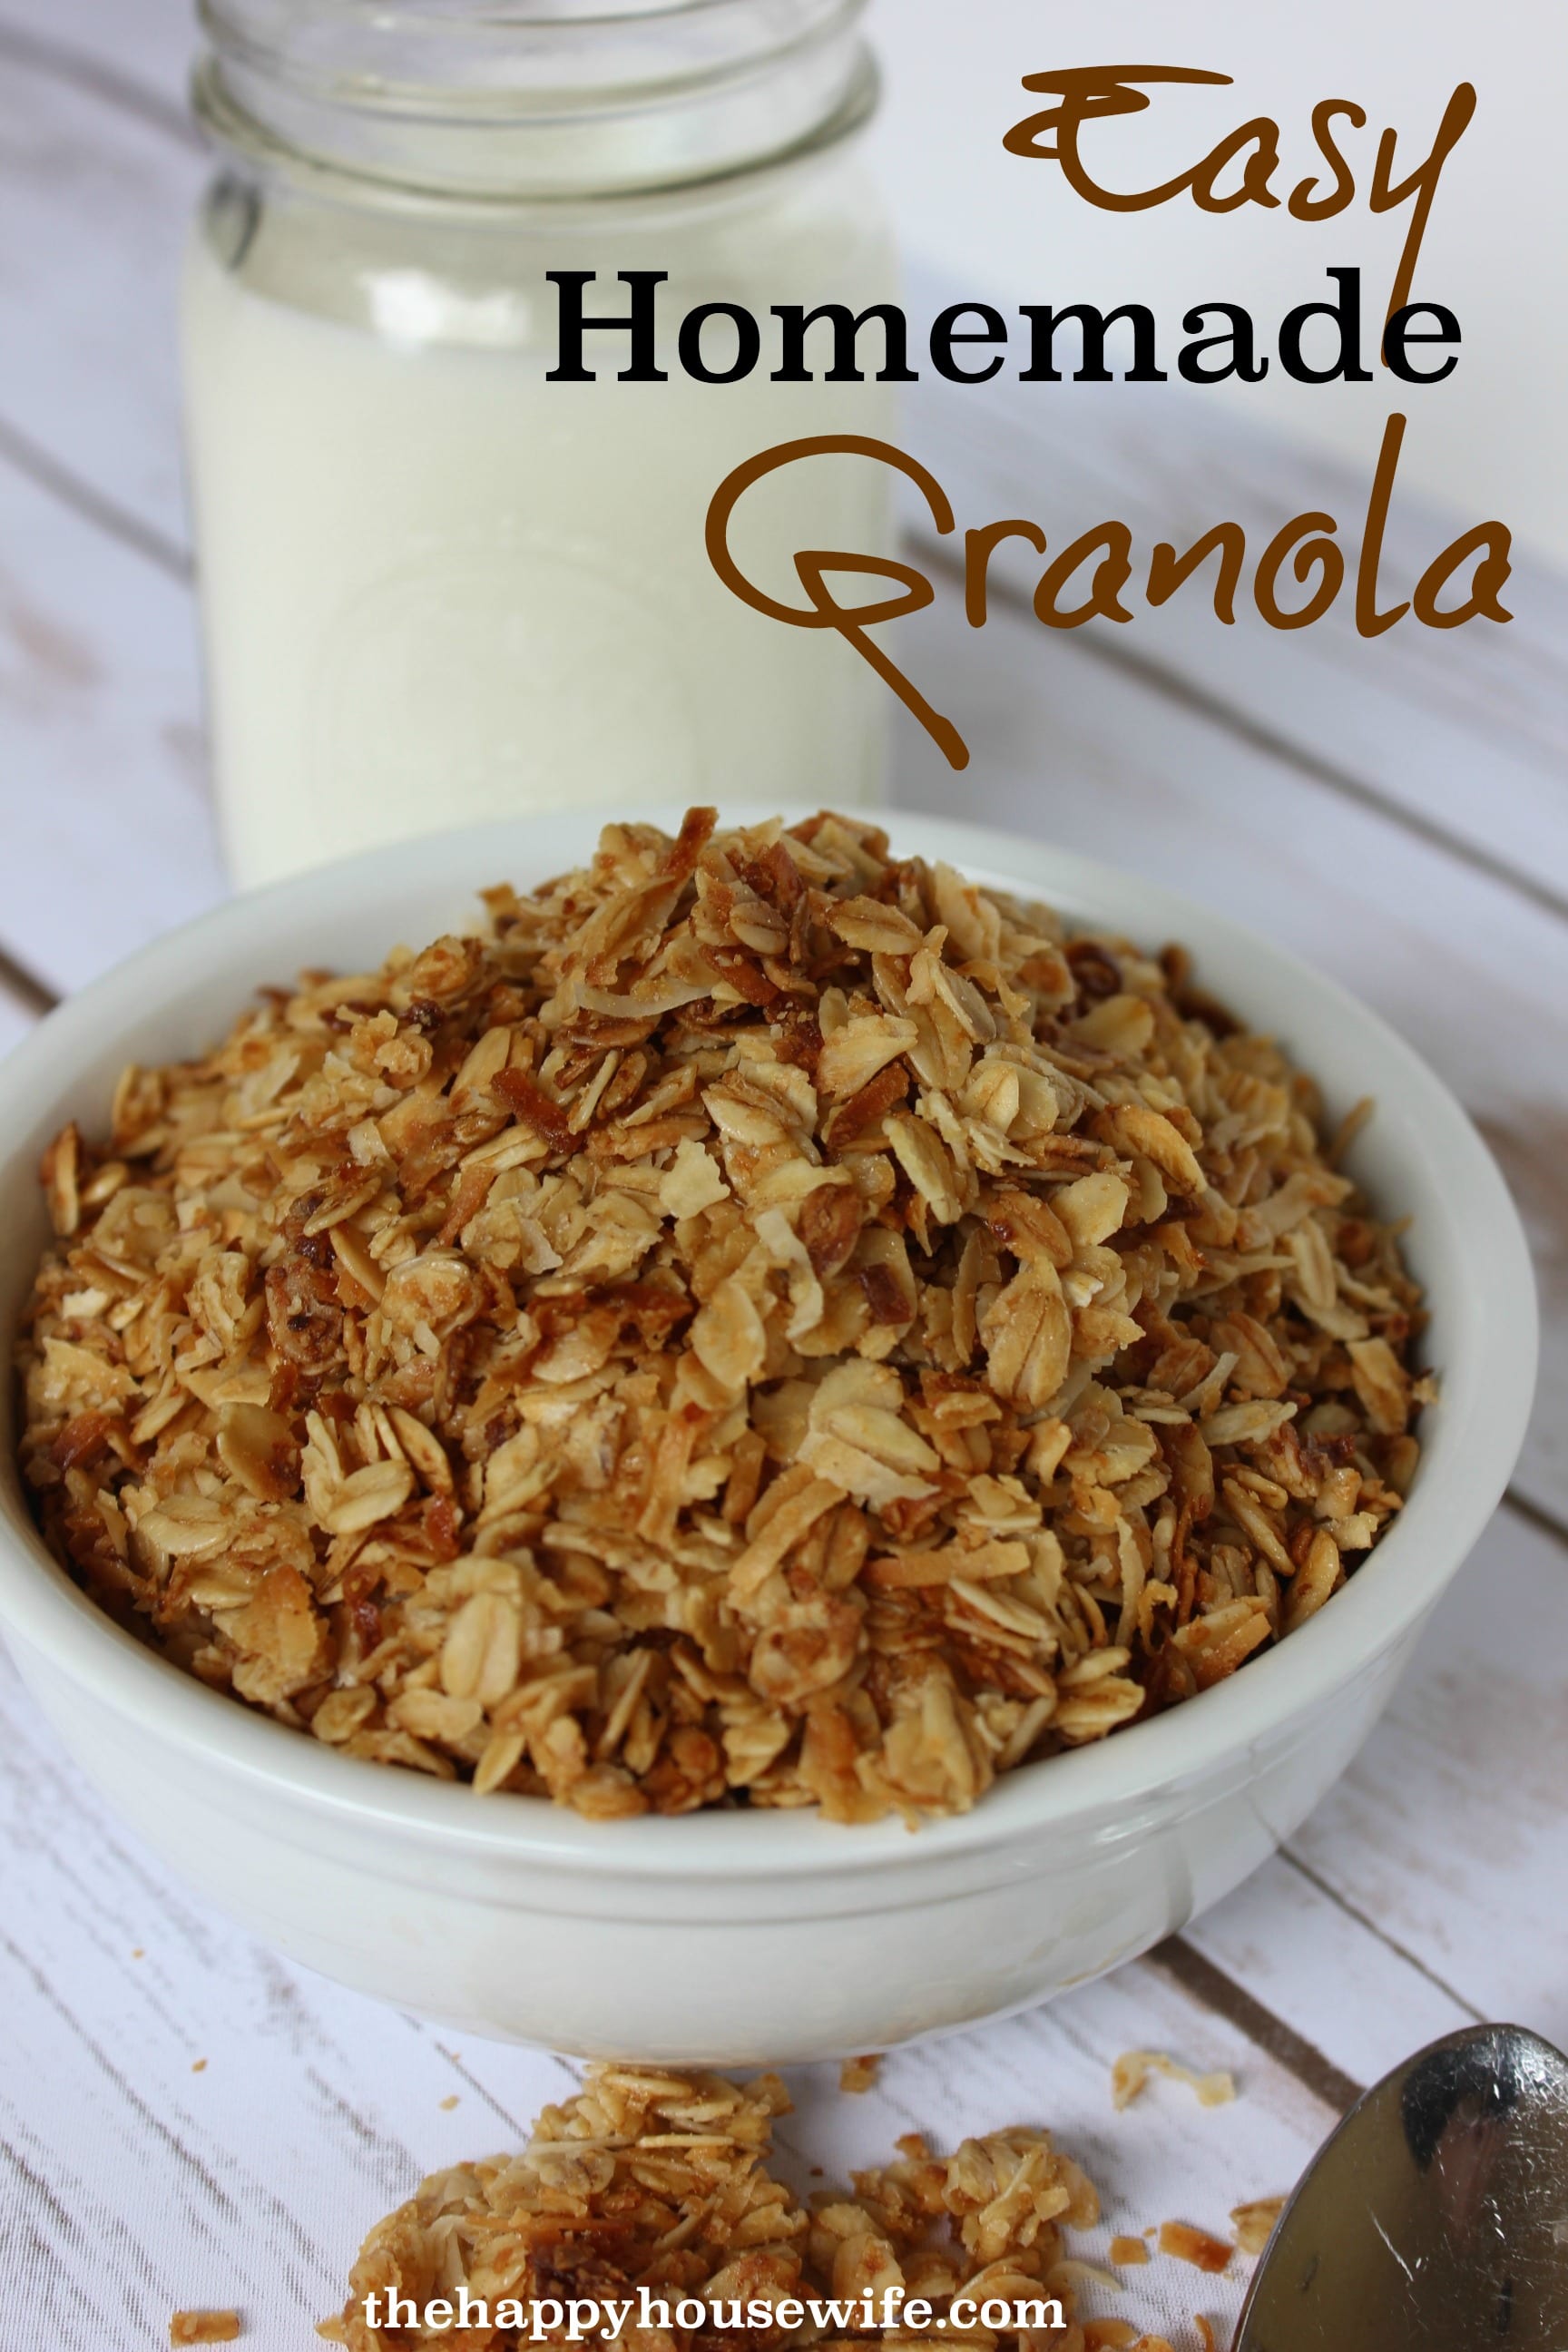 Homemade Granola - The Happy Housewife™ :: Cooking